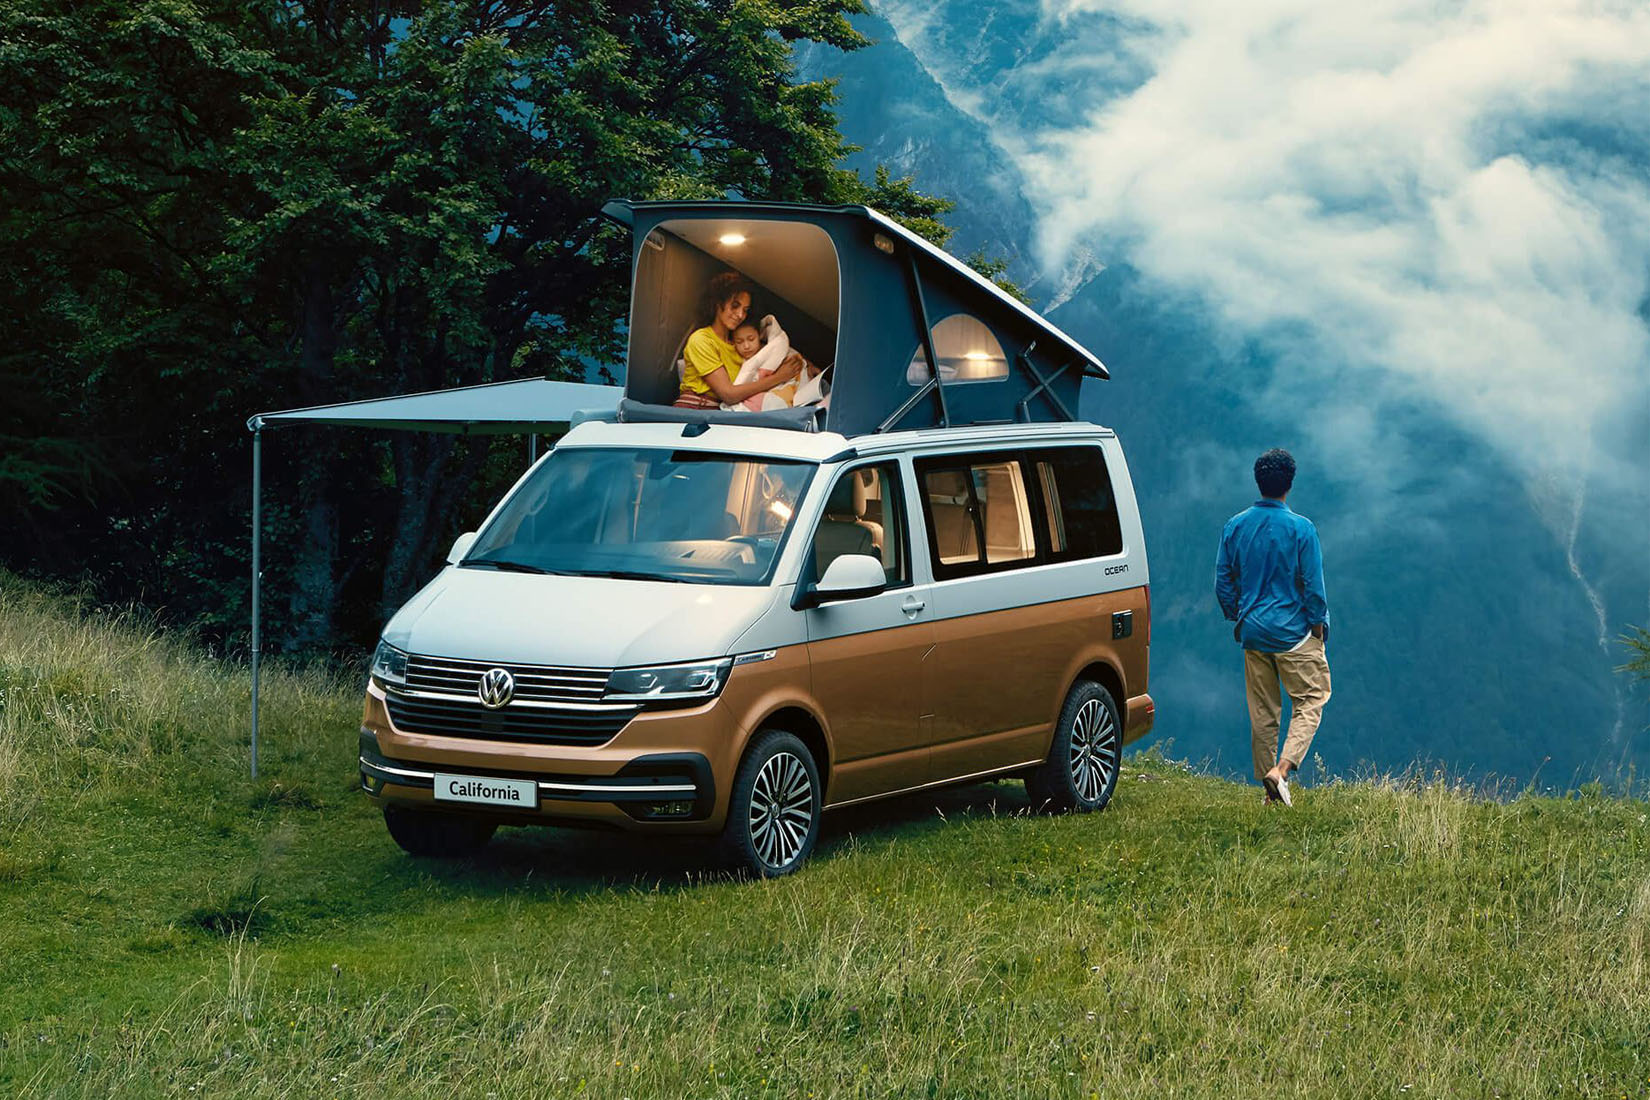 meilleures marques de camping-cars volkswagen review It's Luxe Time